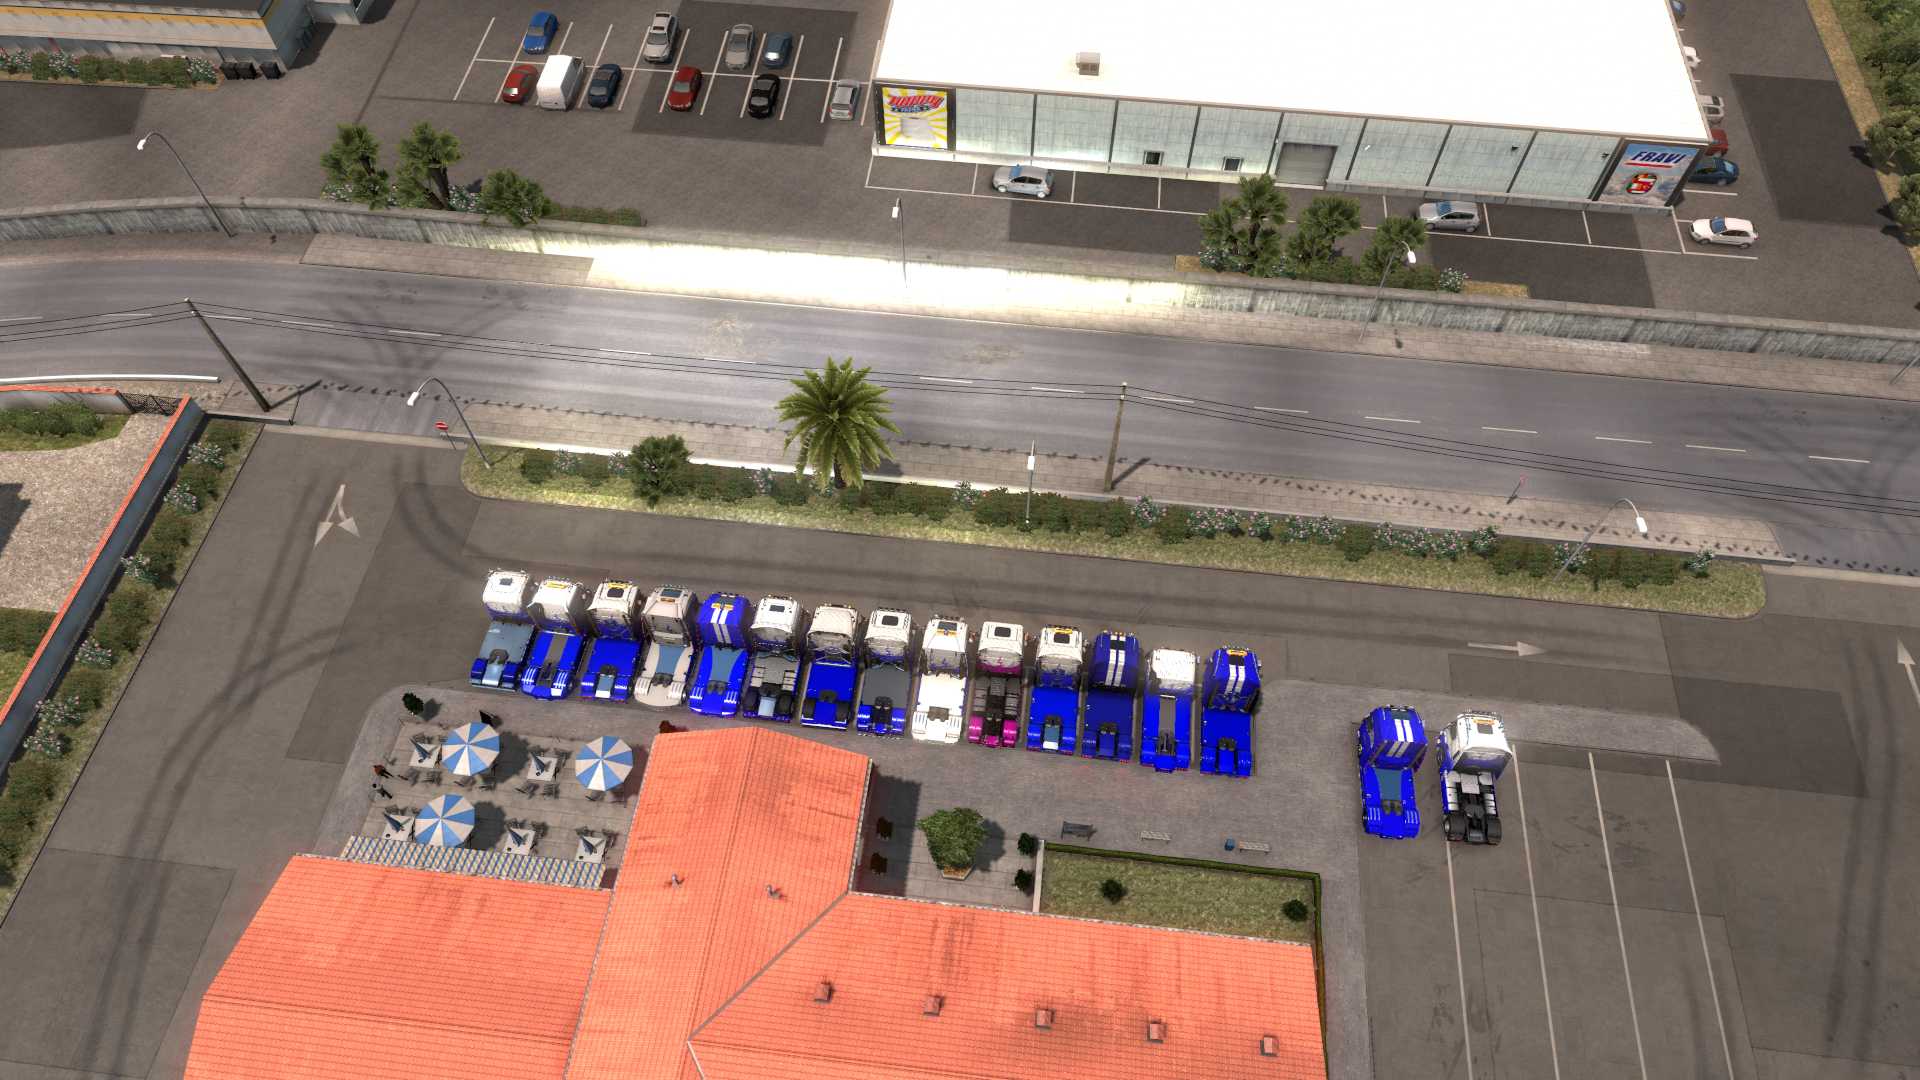 ets2_20210402_235942_00.png